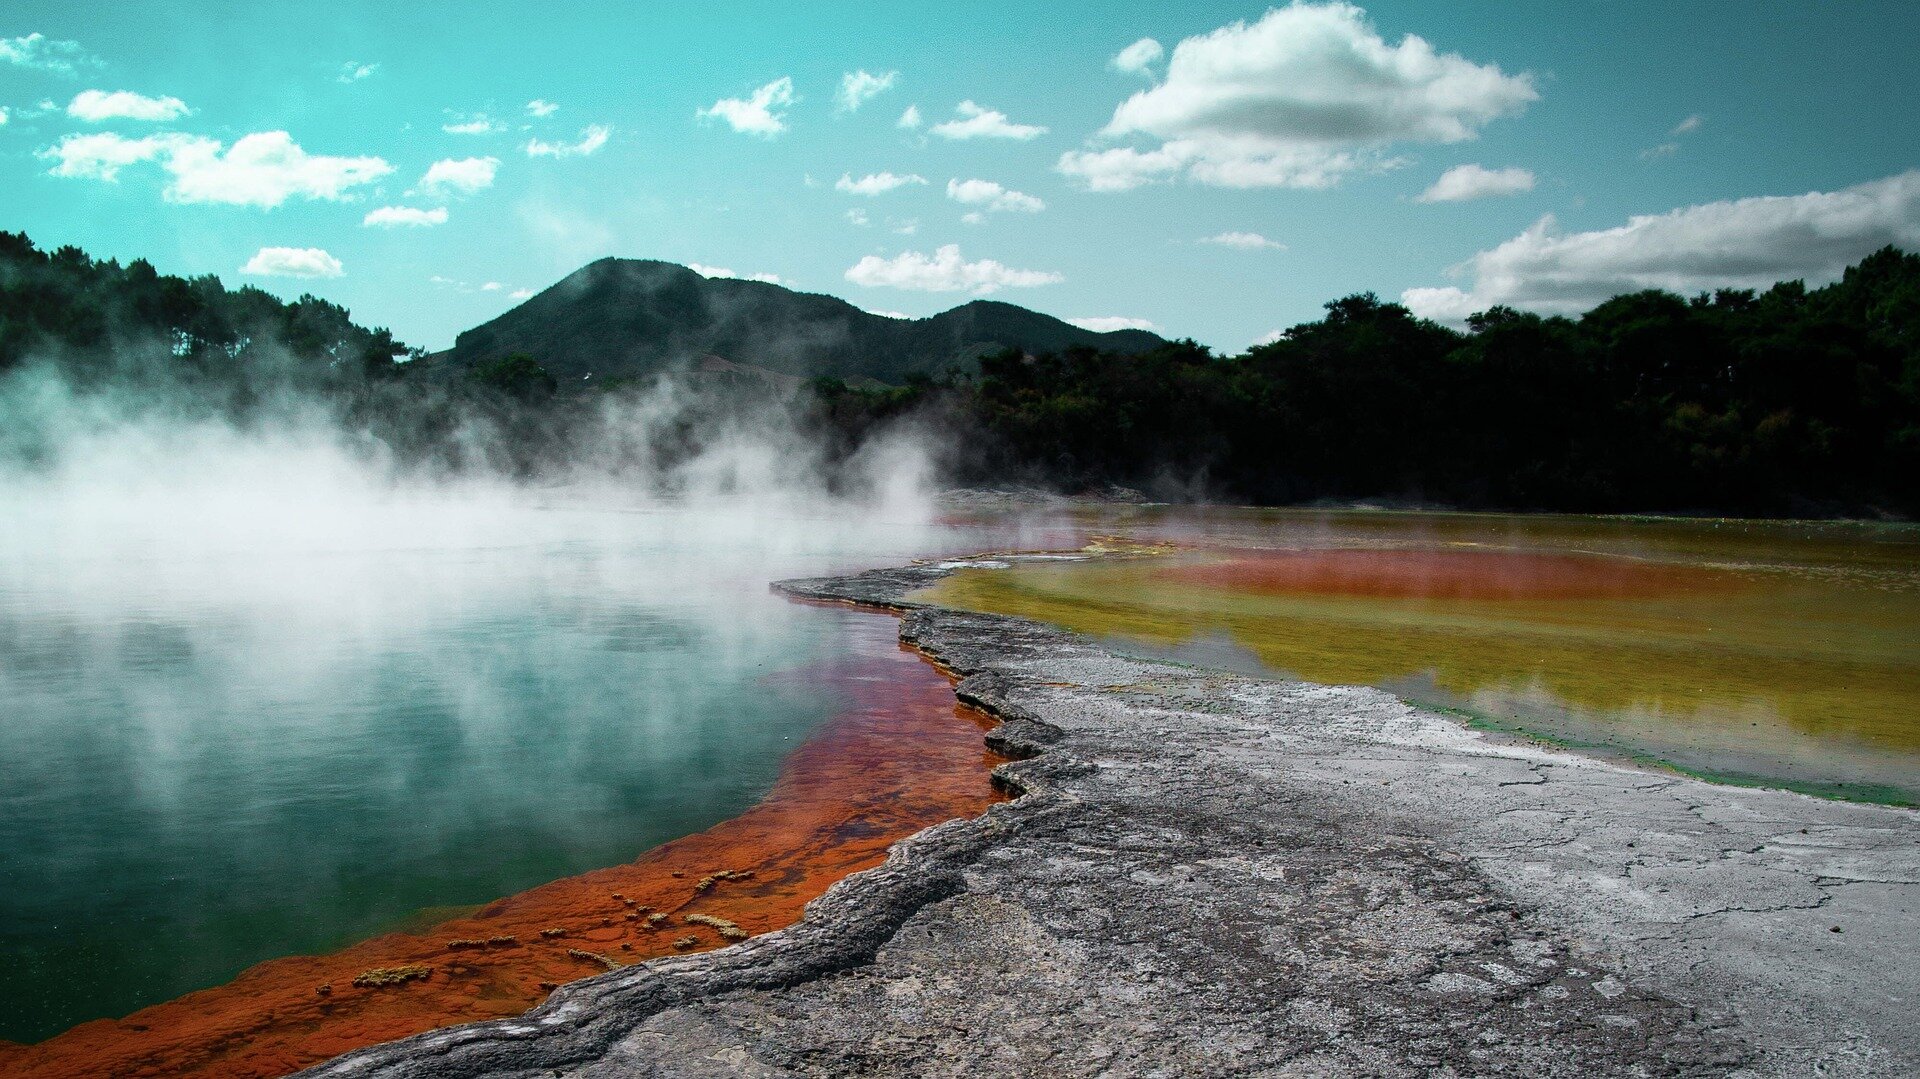 Geothermal bubbles up as another way to fight climate change